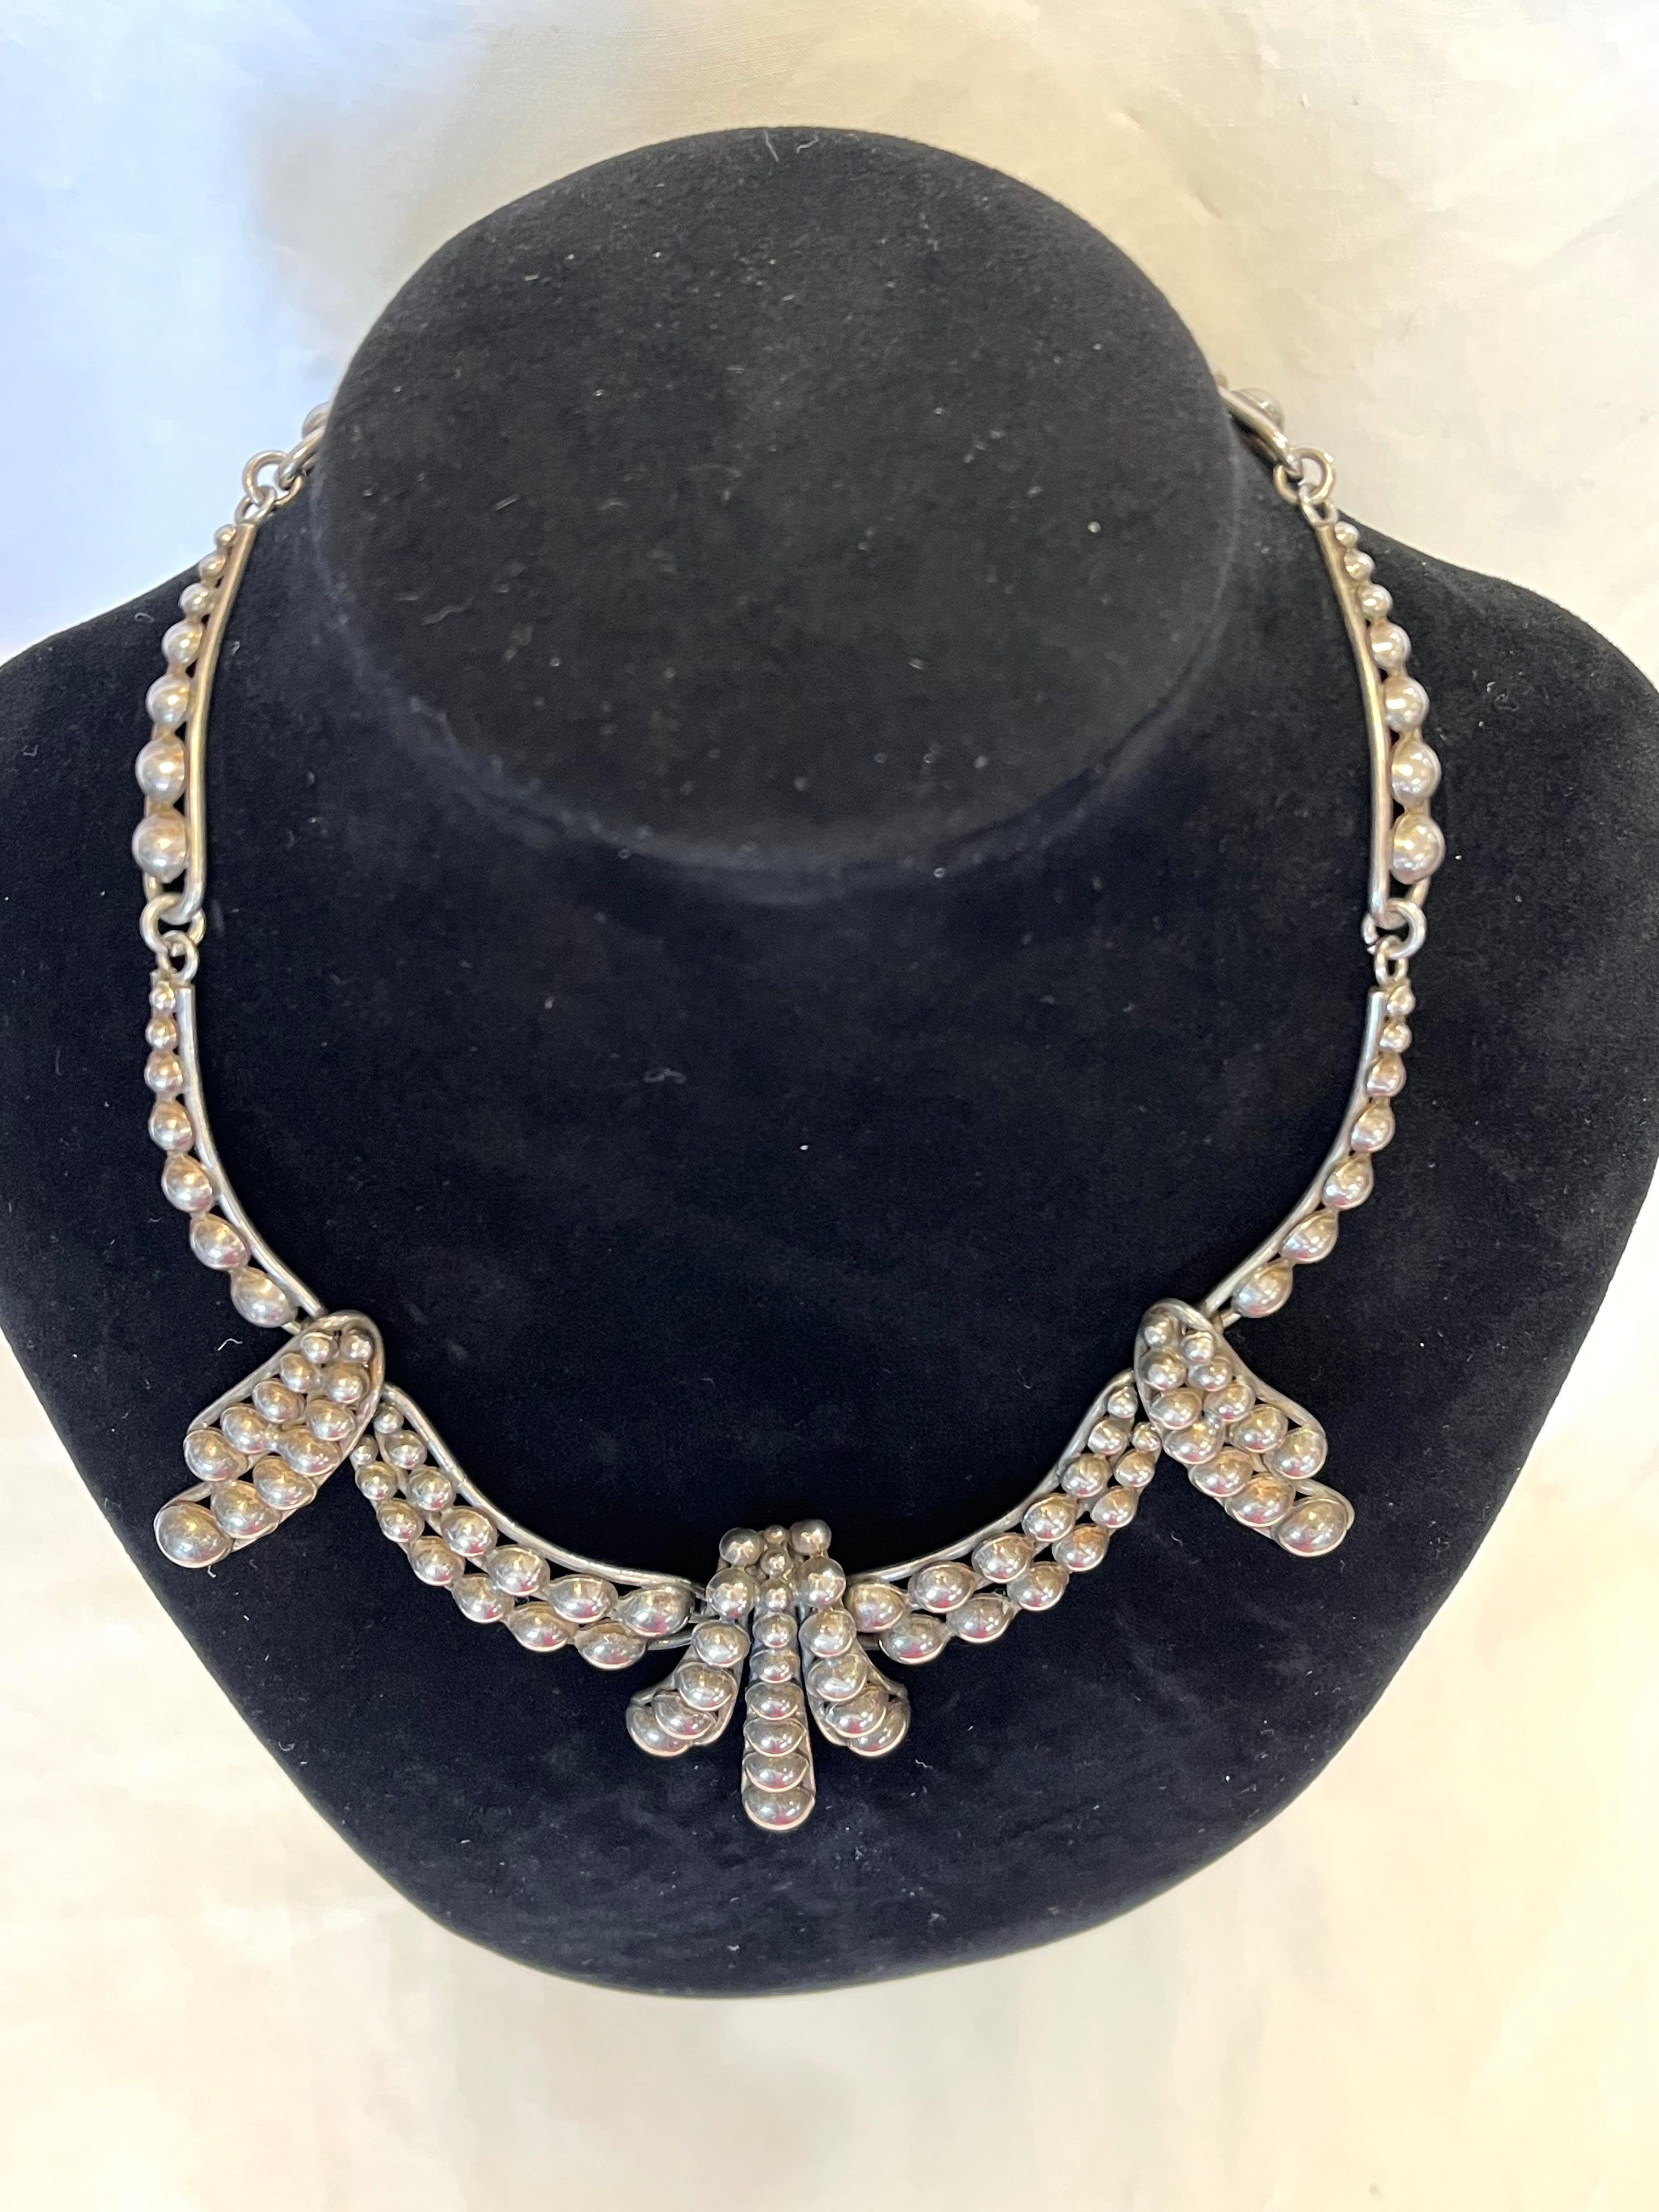 A beautiful and bold statement necklace in sterling silver by Napier. The half spheres are nestled together in further organic, playful forms that when presented on the neck create almost a choker or collar style necklace. The Napier Company, as